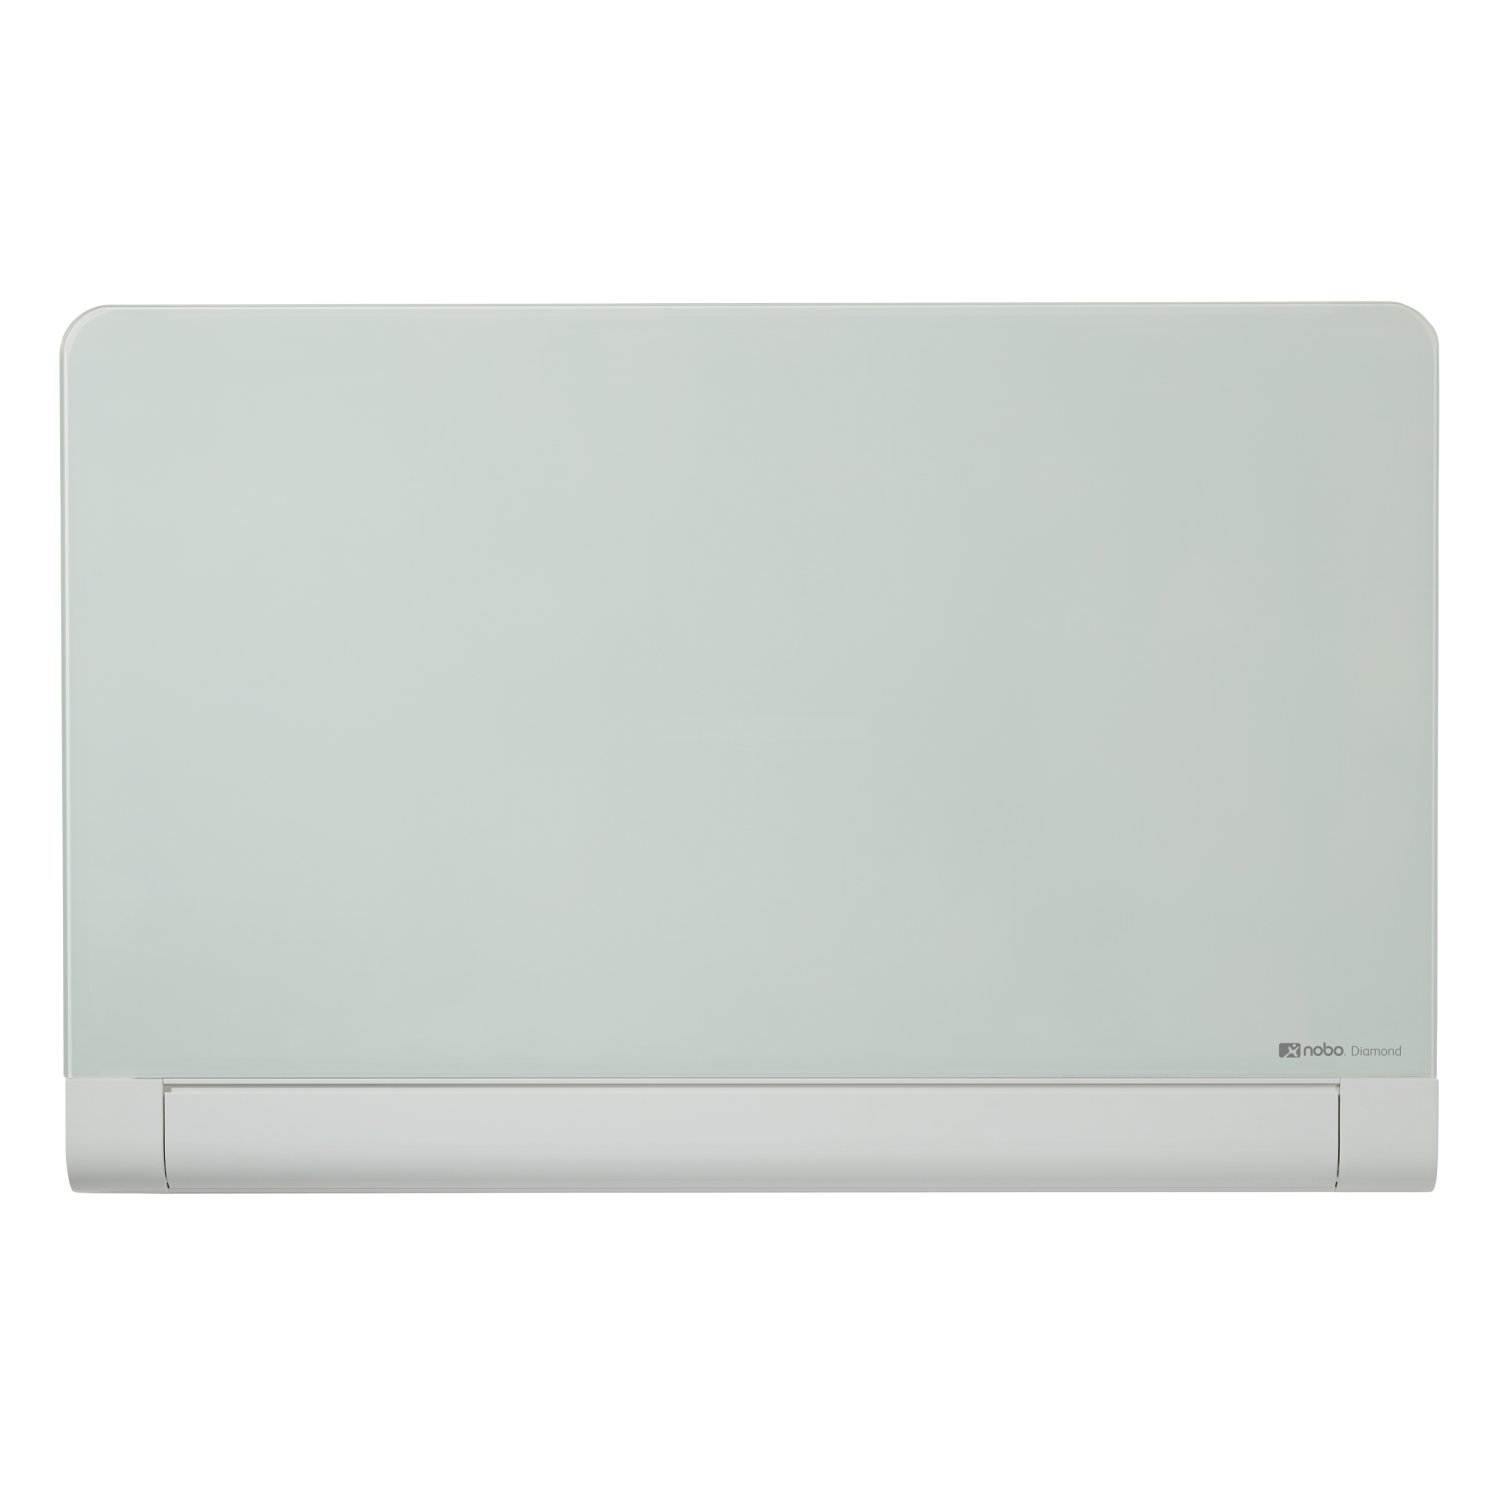 Photos - Dry Erase Board / Flipchart Nobo Diamond Glass Board with Rounded Corners Magnetic White 1883x1059 190 